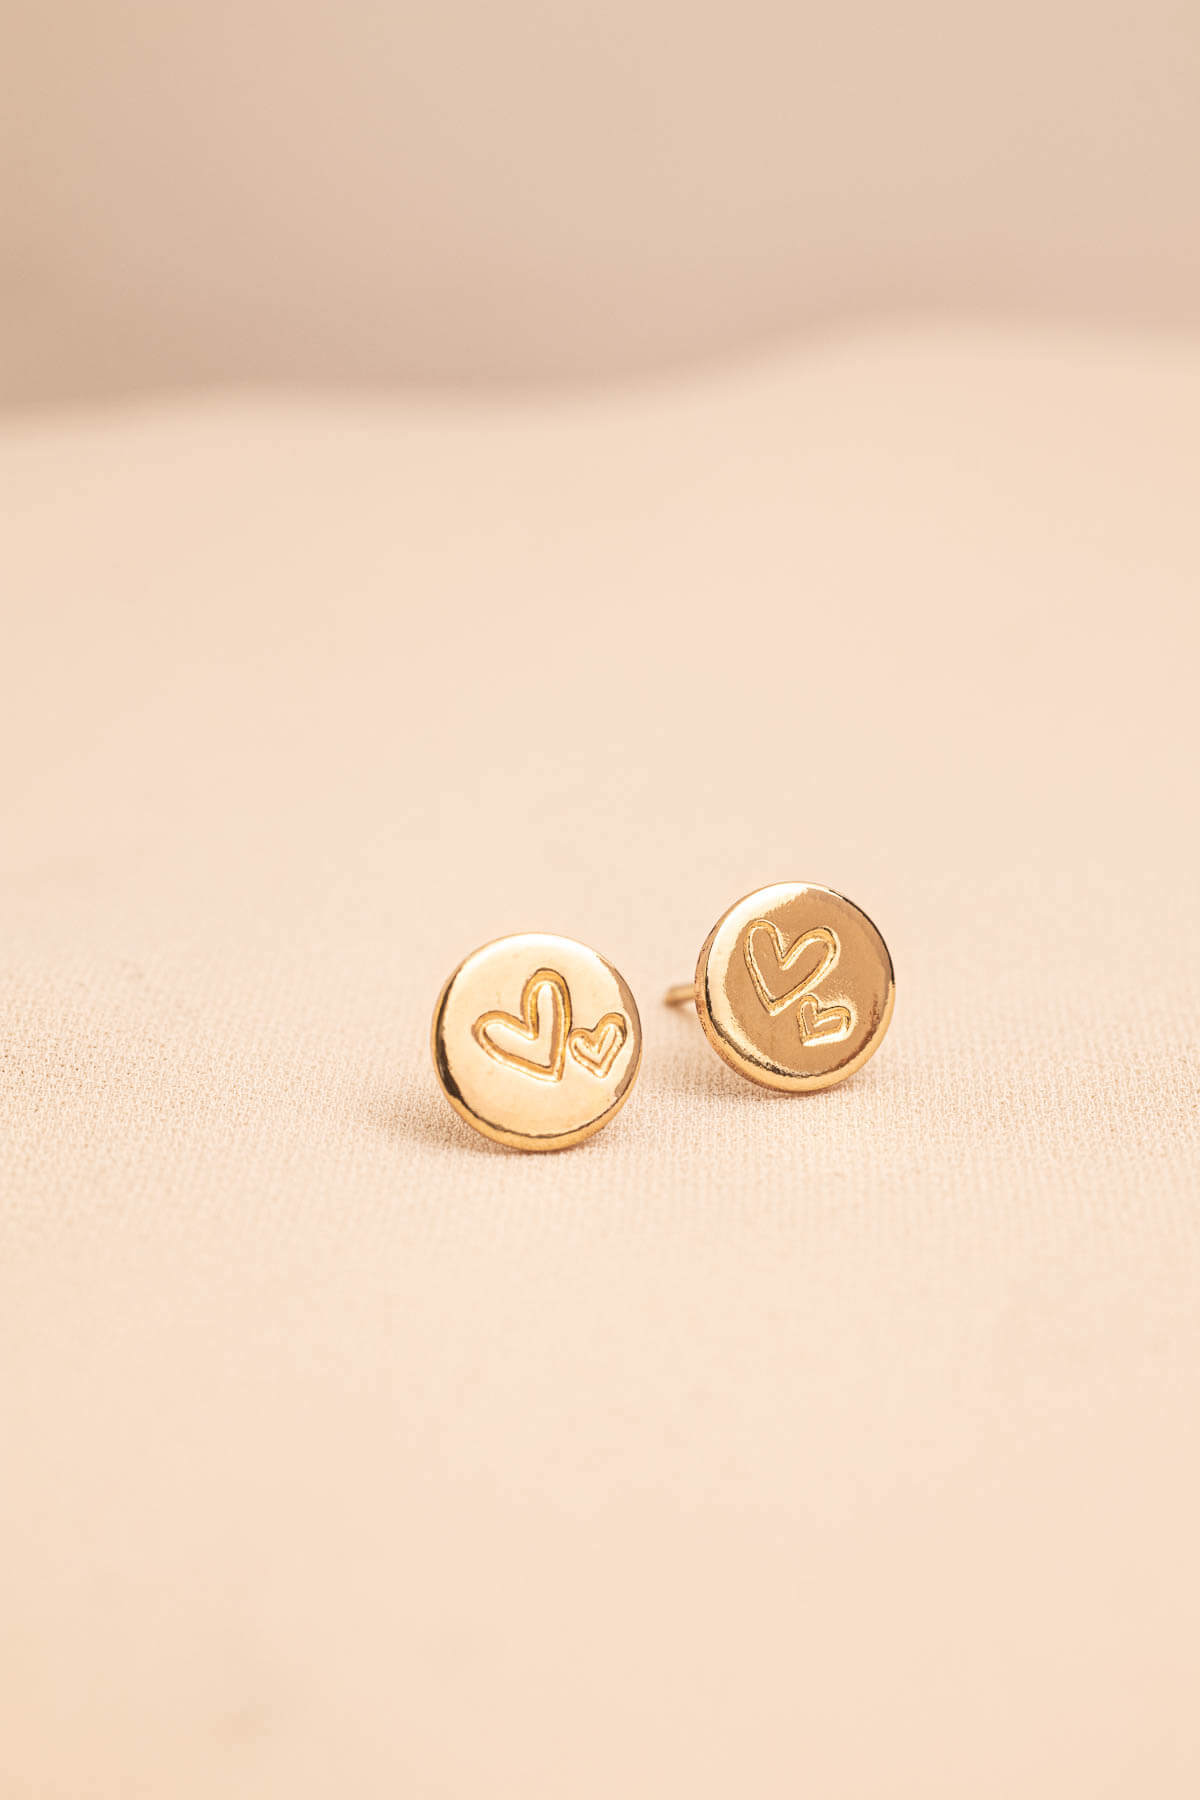 You and Me - Twin Hearts Disc Stud Earrings